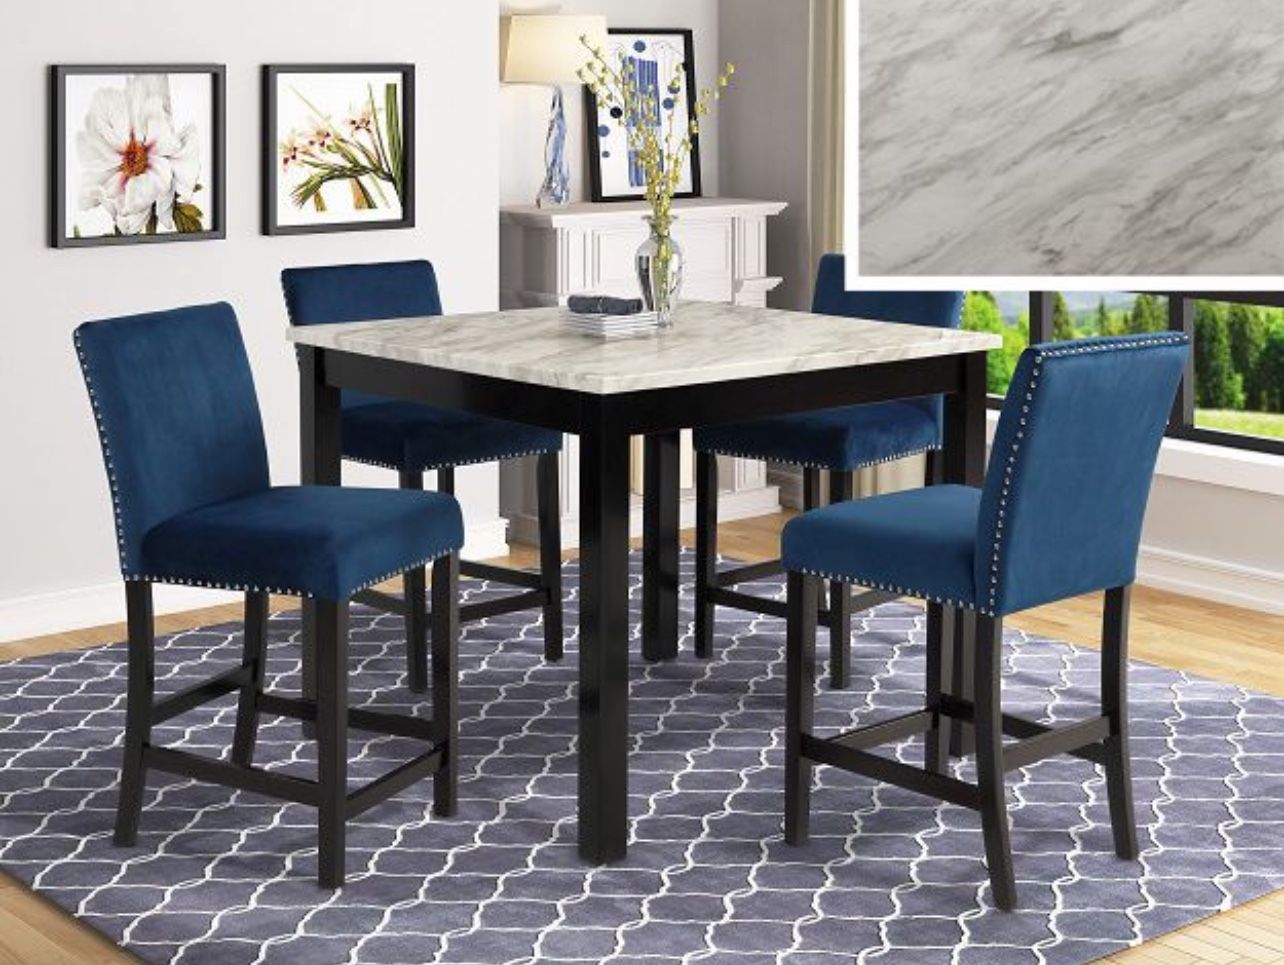 45% Sale!!! Height Counter Dining Table & 4 Chairs 